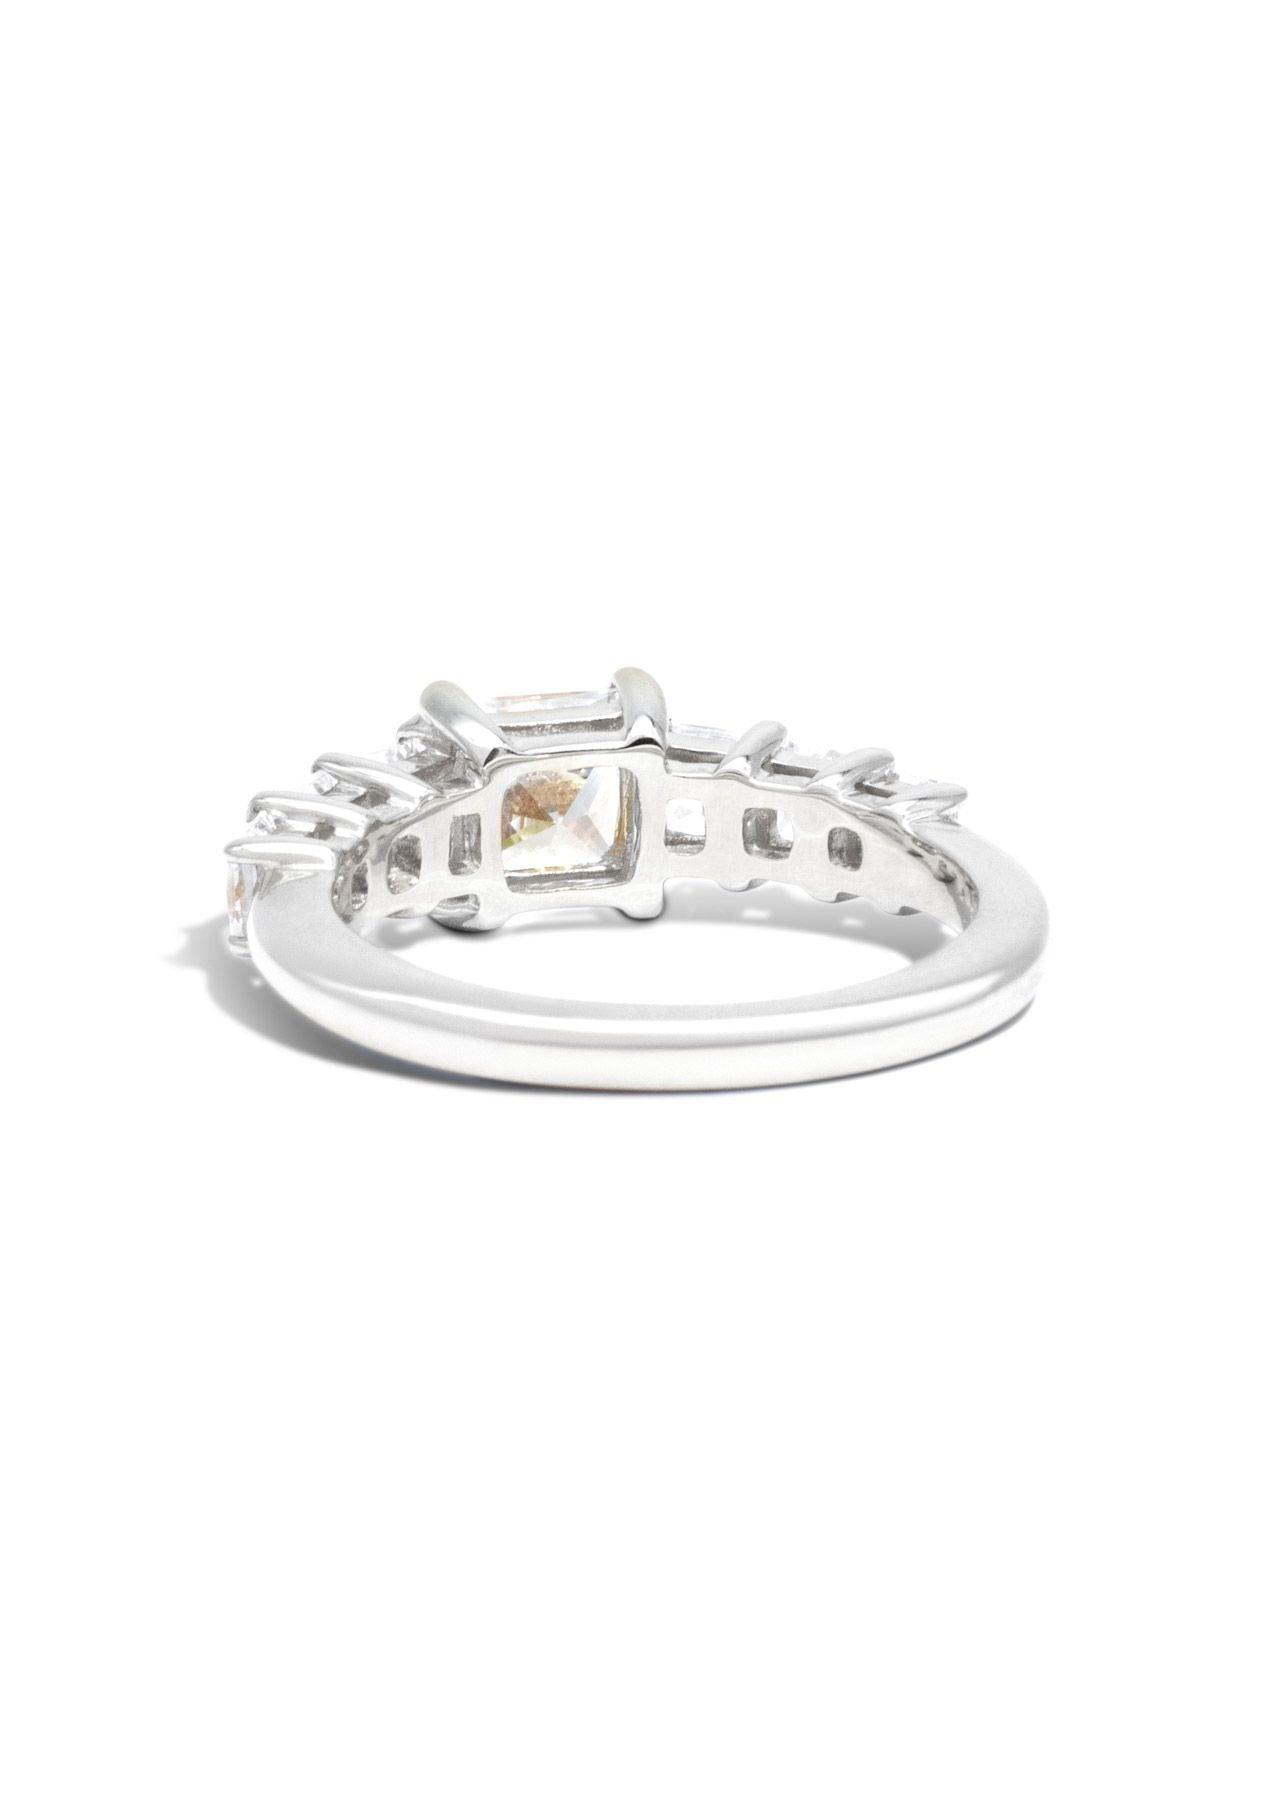 The Princess Banks White Gold Cultured Diamond Ring